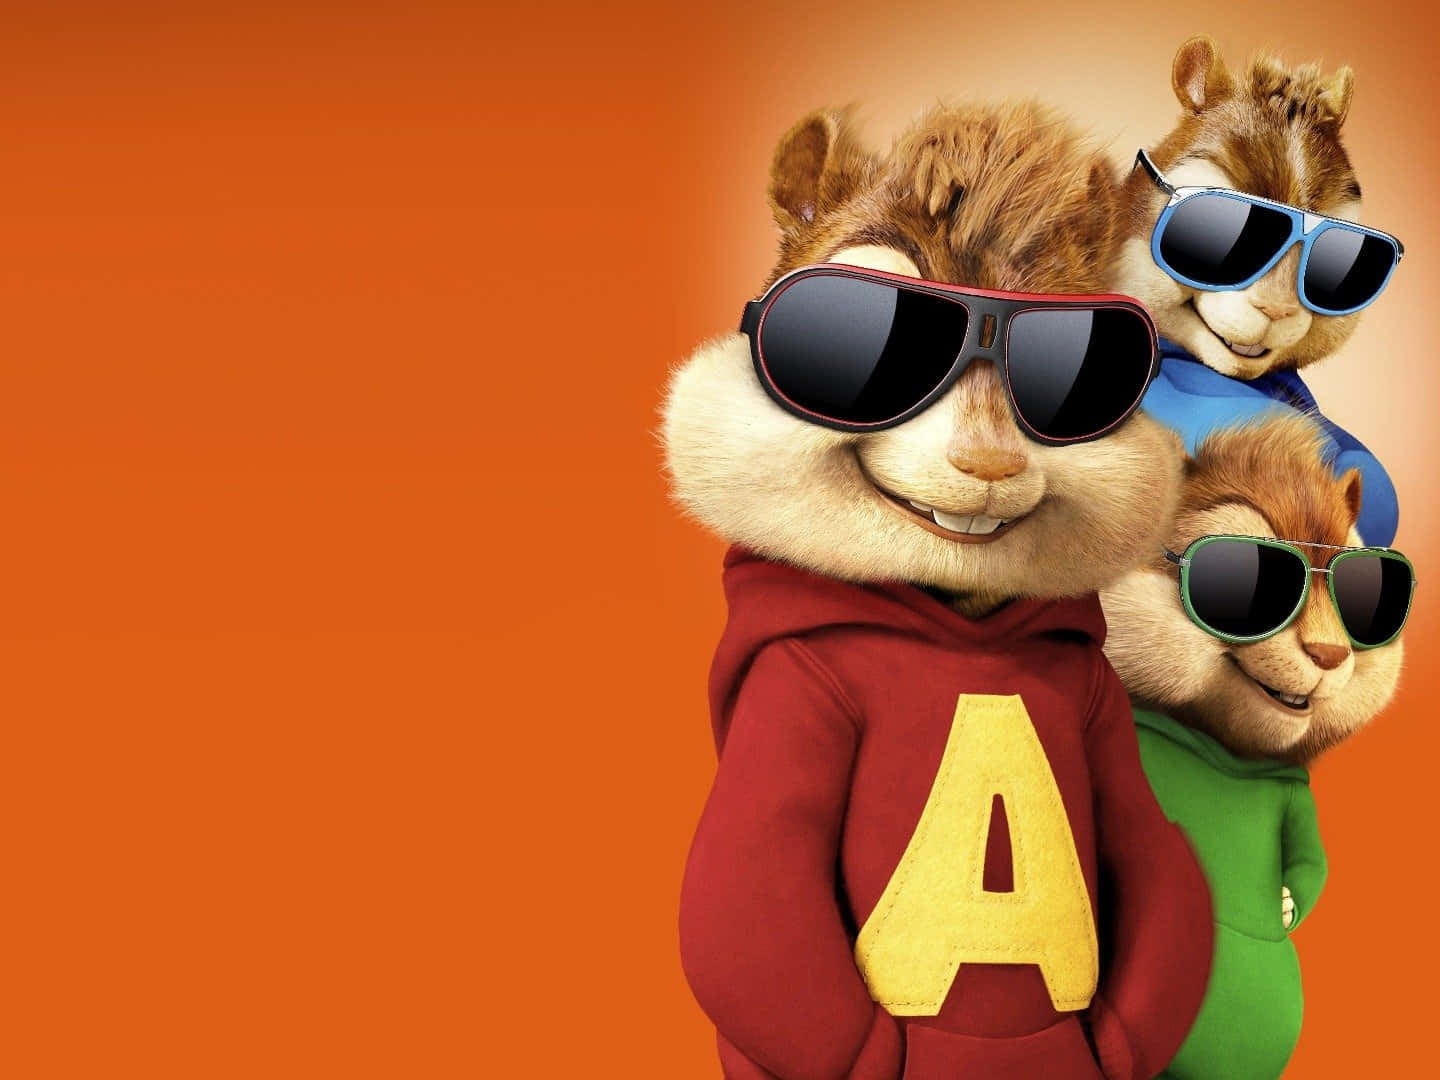 Join Alvin and The Chipmunks on another musical adventure!